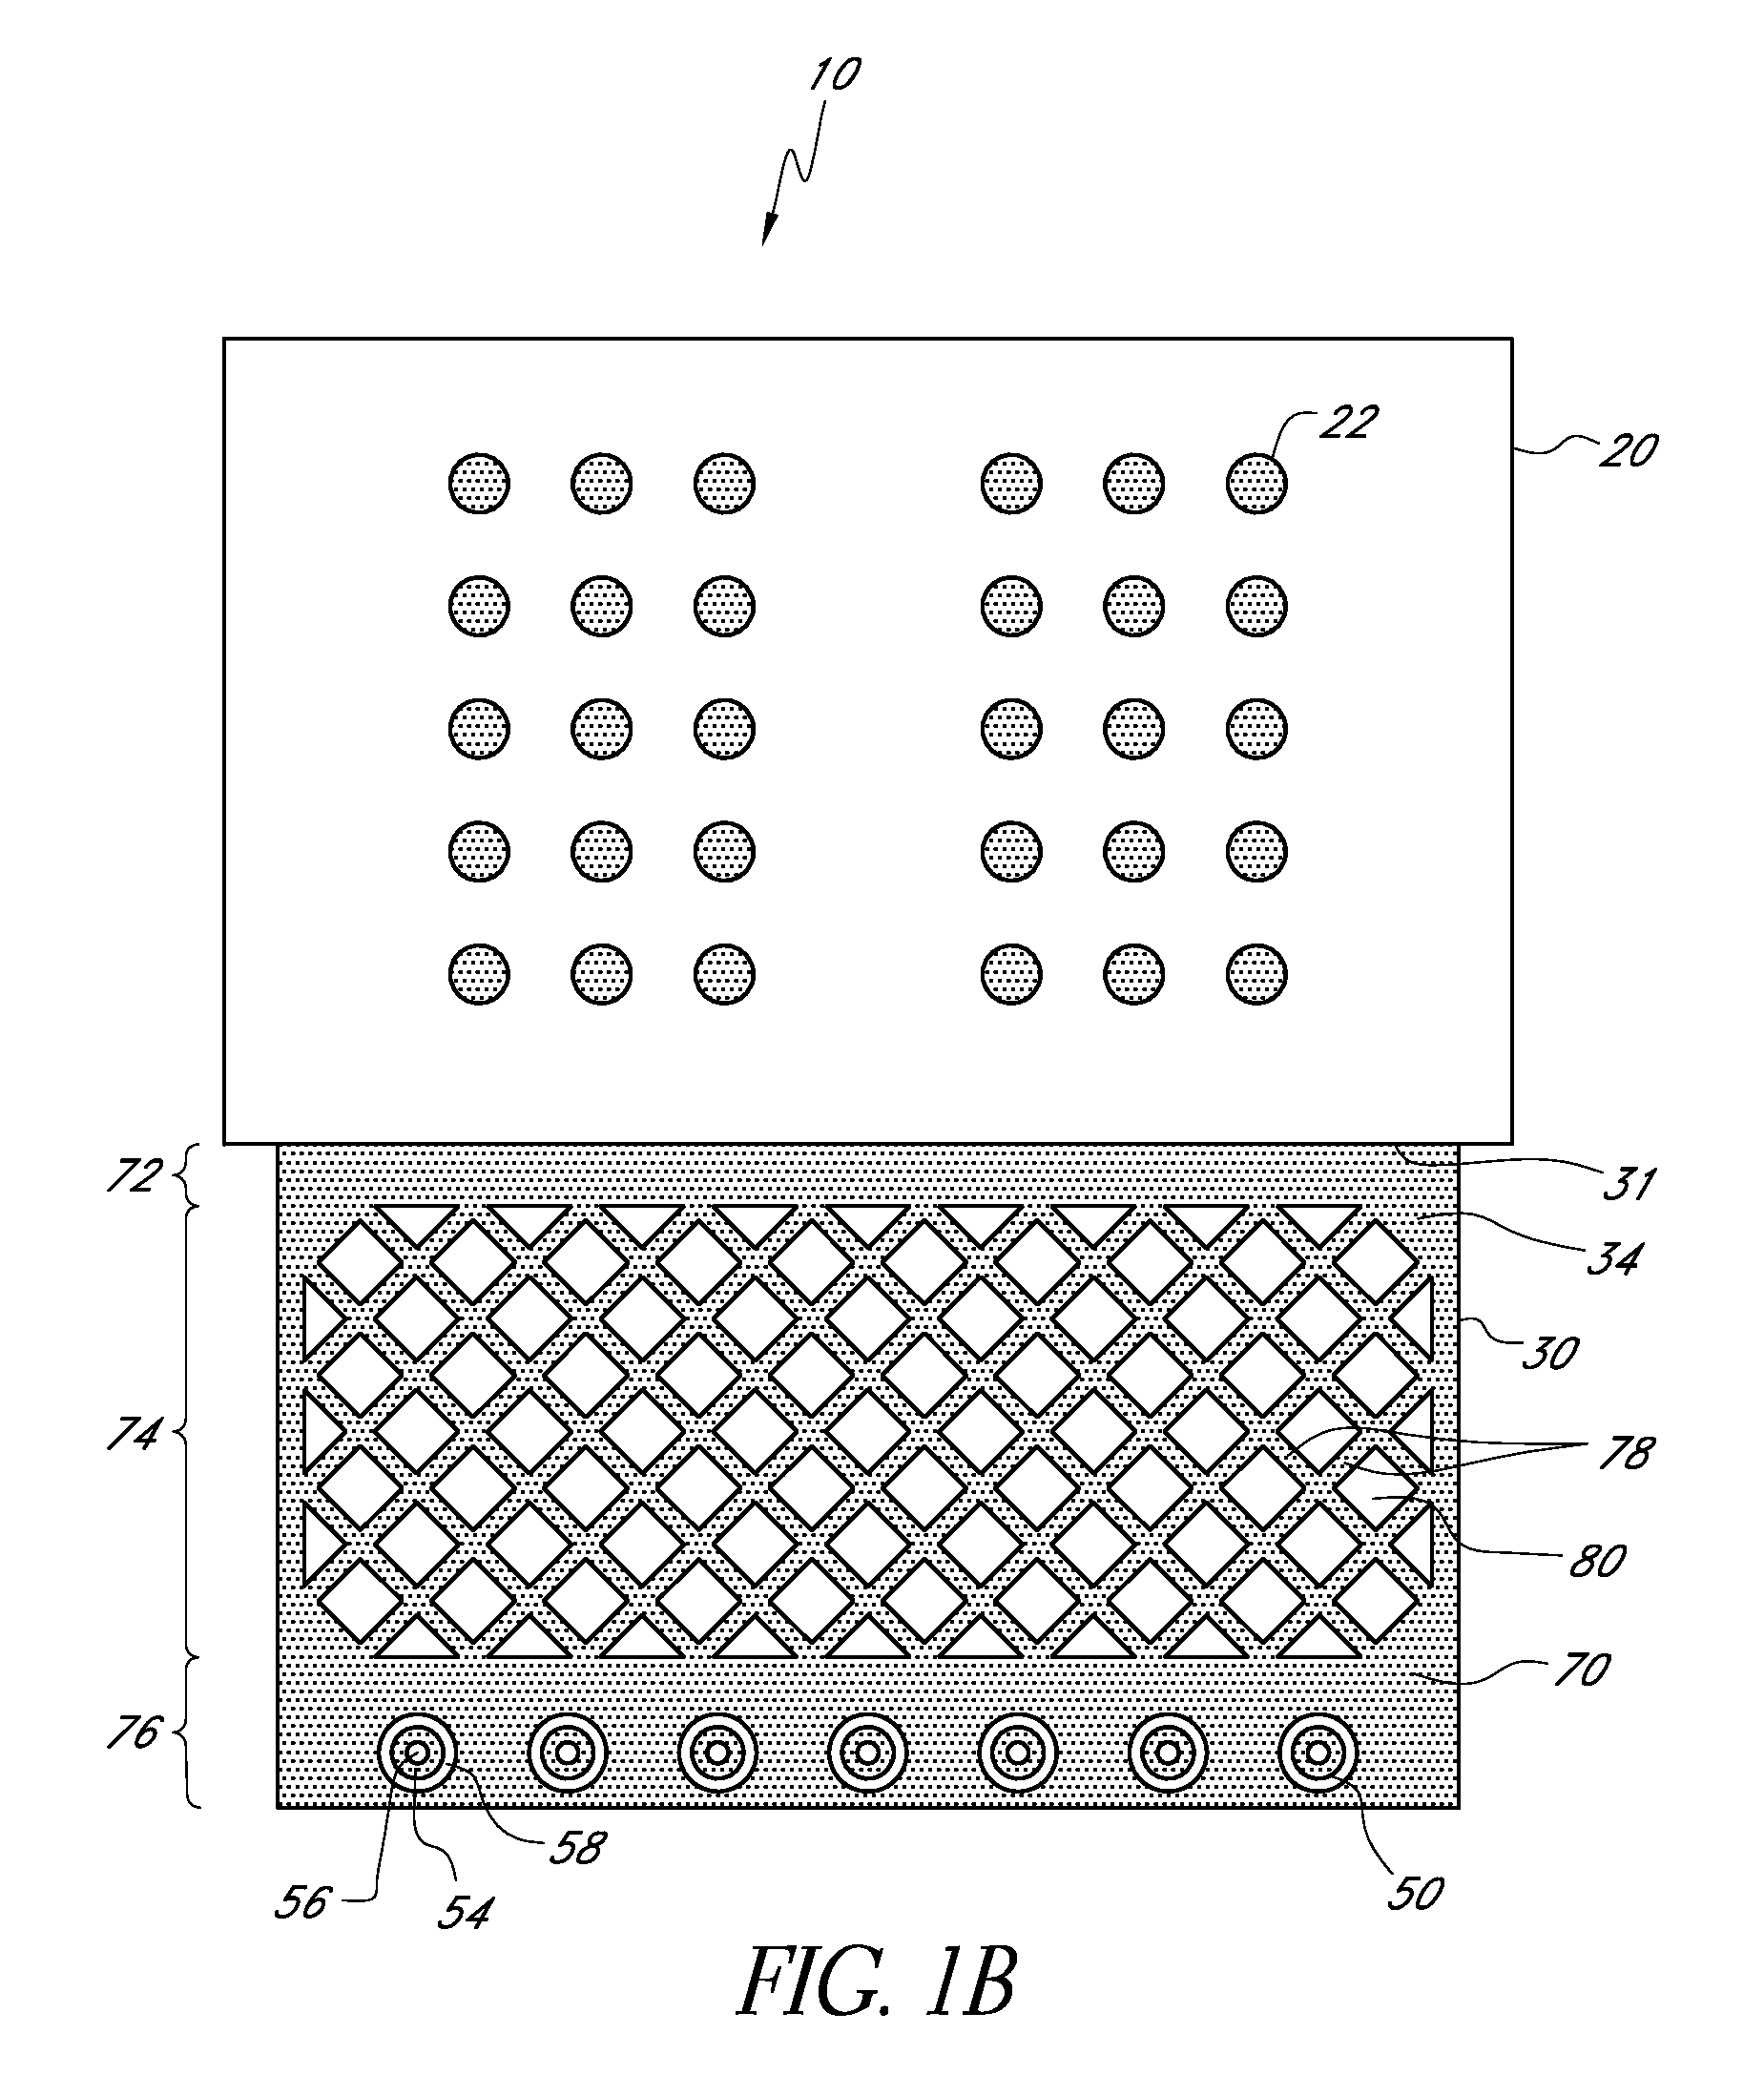 Circuit card with flexible connection for memory module with heat spreader